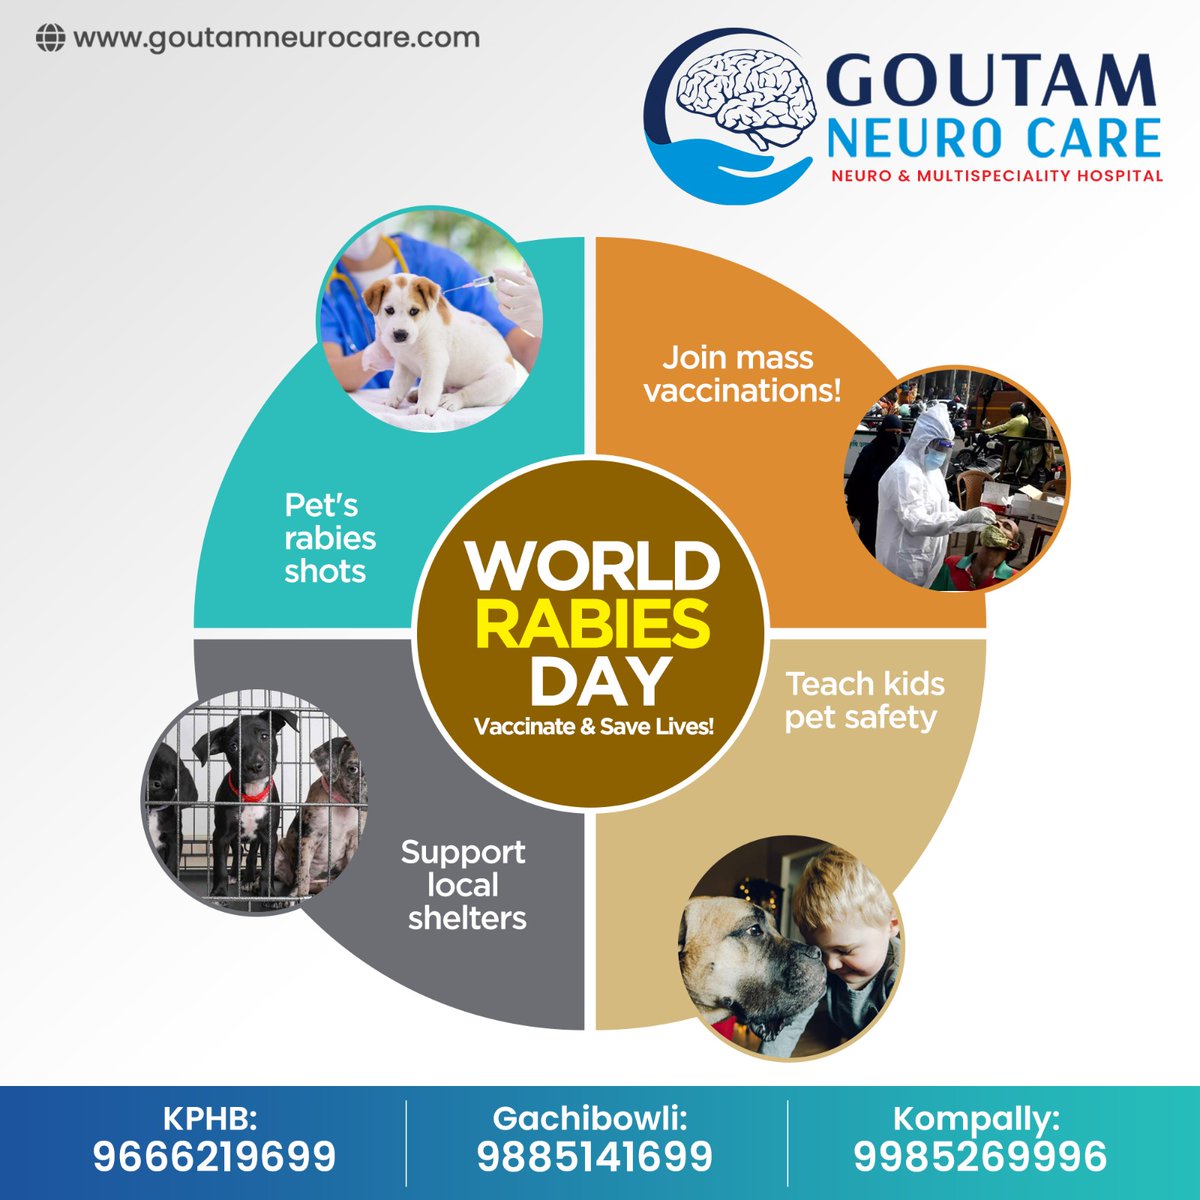 Join us on World Rabies Day at Goutam Neuro Care Hospital as we raise awareness about this preventable disease.
#WorldRabiesDay #EndRabies #RabiesPrevention #RabiesAwareness #VaccinatePets #PetHealth
#RabiesFreeWorld #ProtectYourPets #RabiesVaccine #RabiesAction #besttreatment